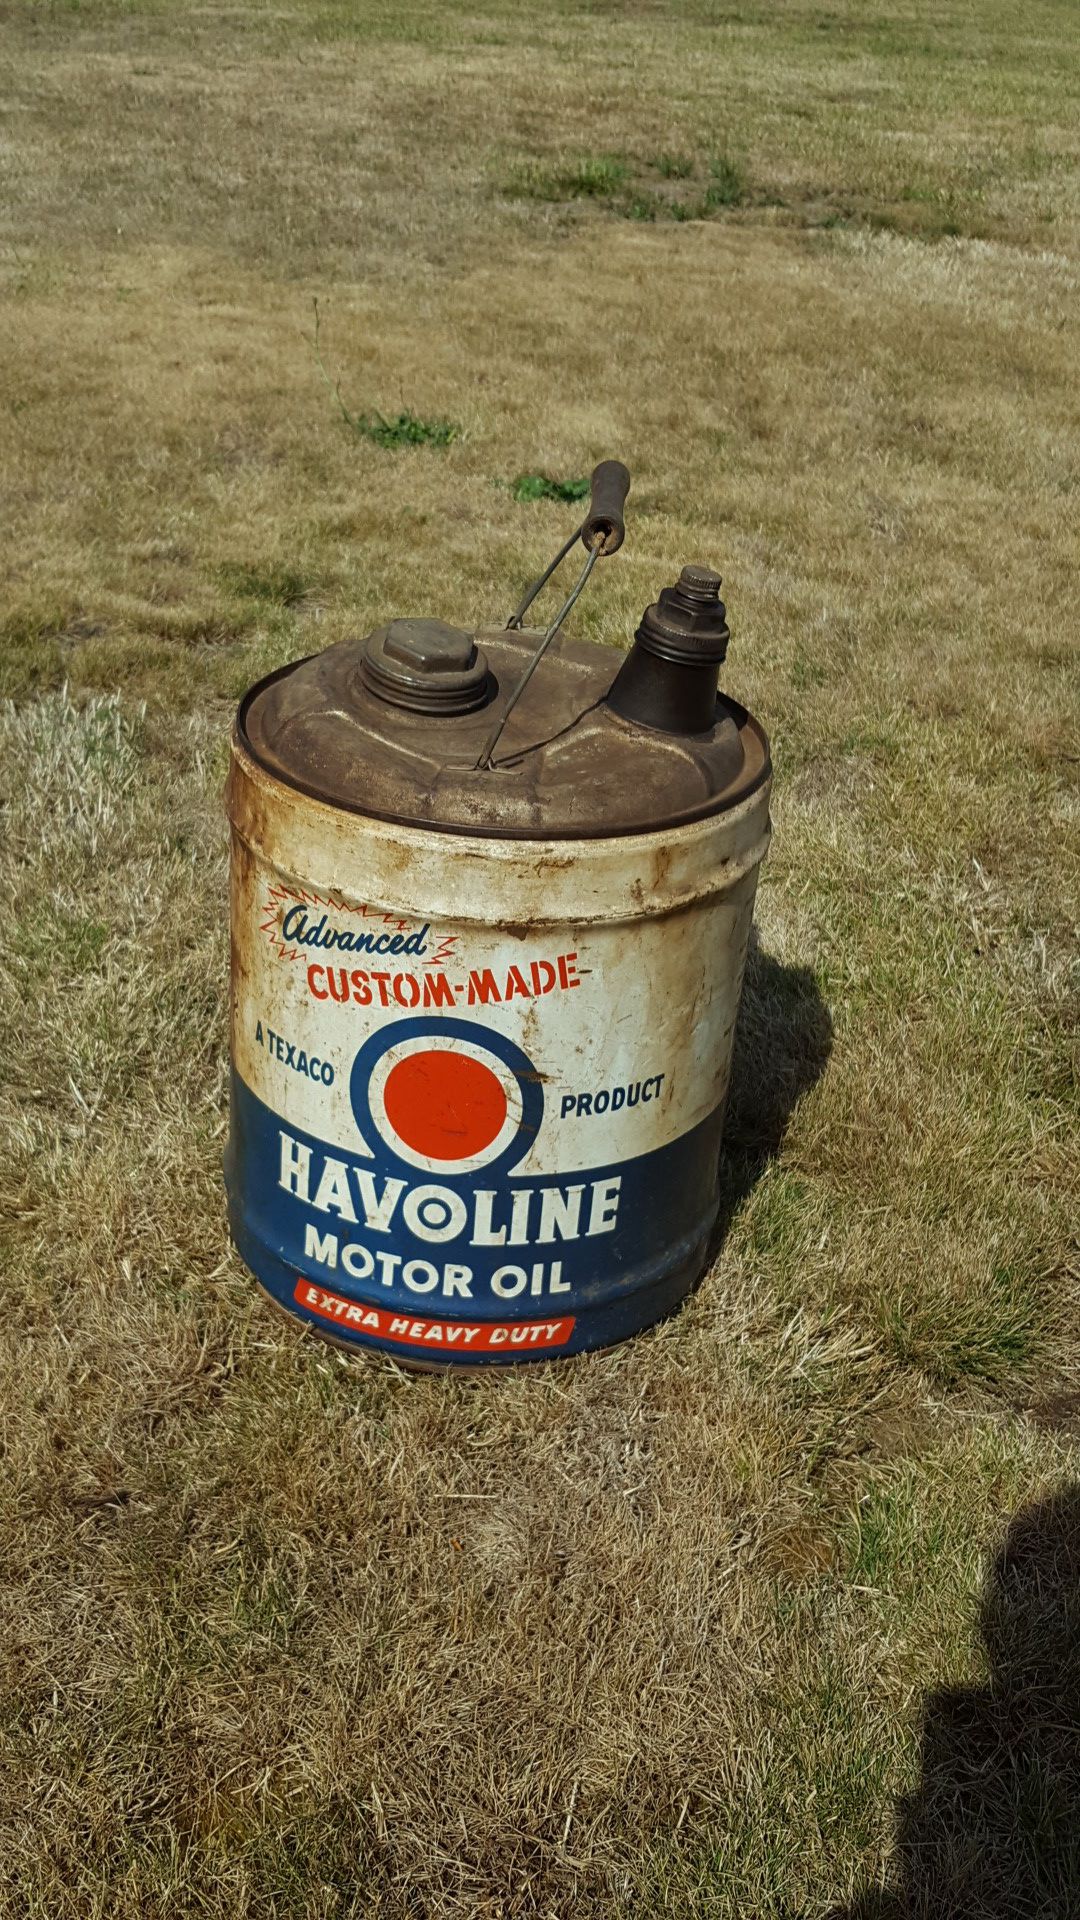 Old antique oil can.